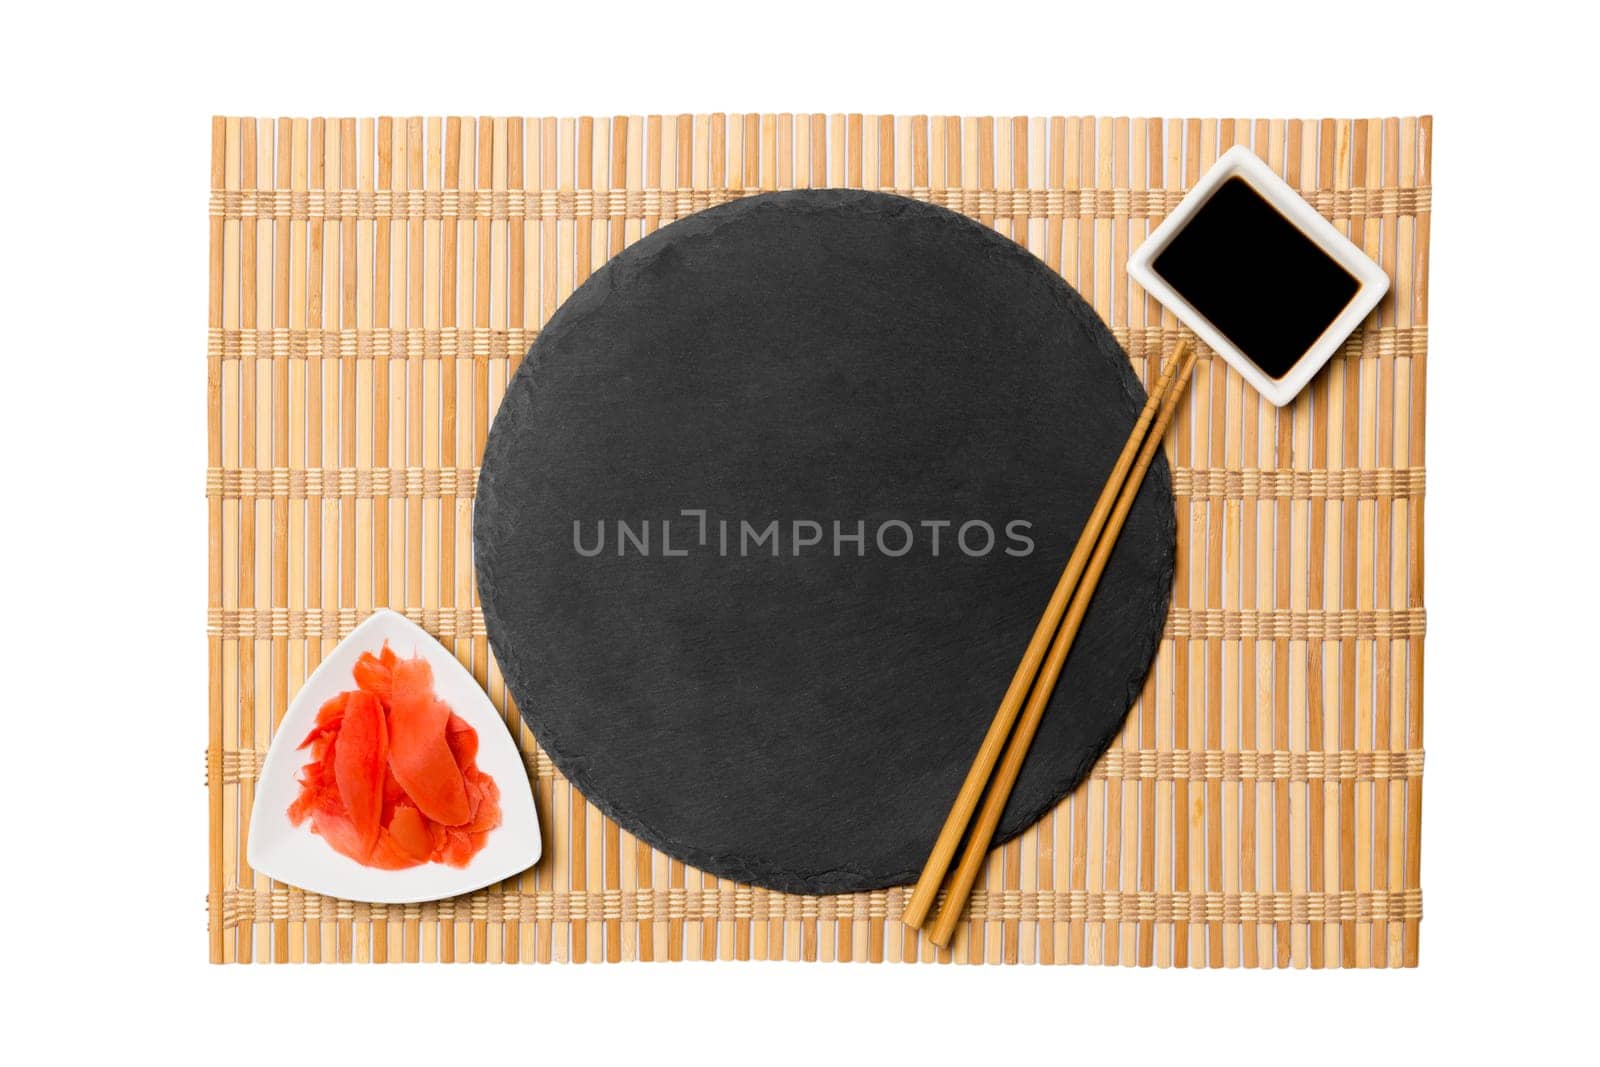 Emptyround black slate plate with chopsticks for sushi and soy sauce, ginger on yellow bamboo mat background. Top view with copy space for you design by Snegok1967